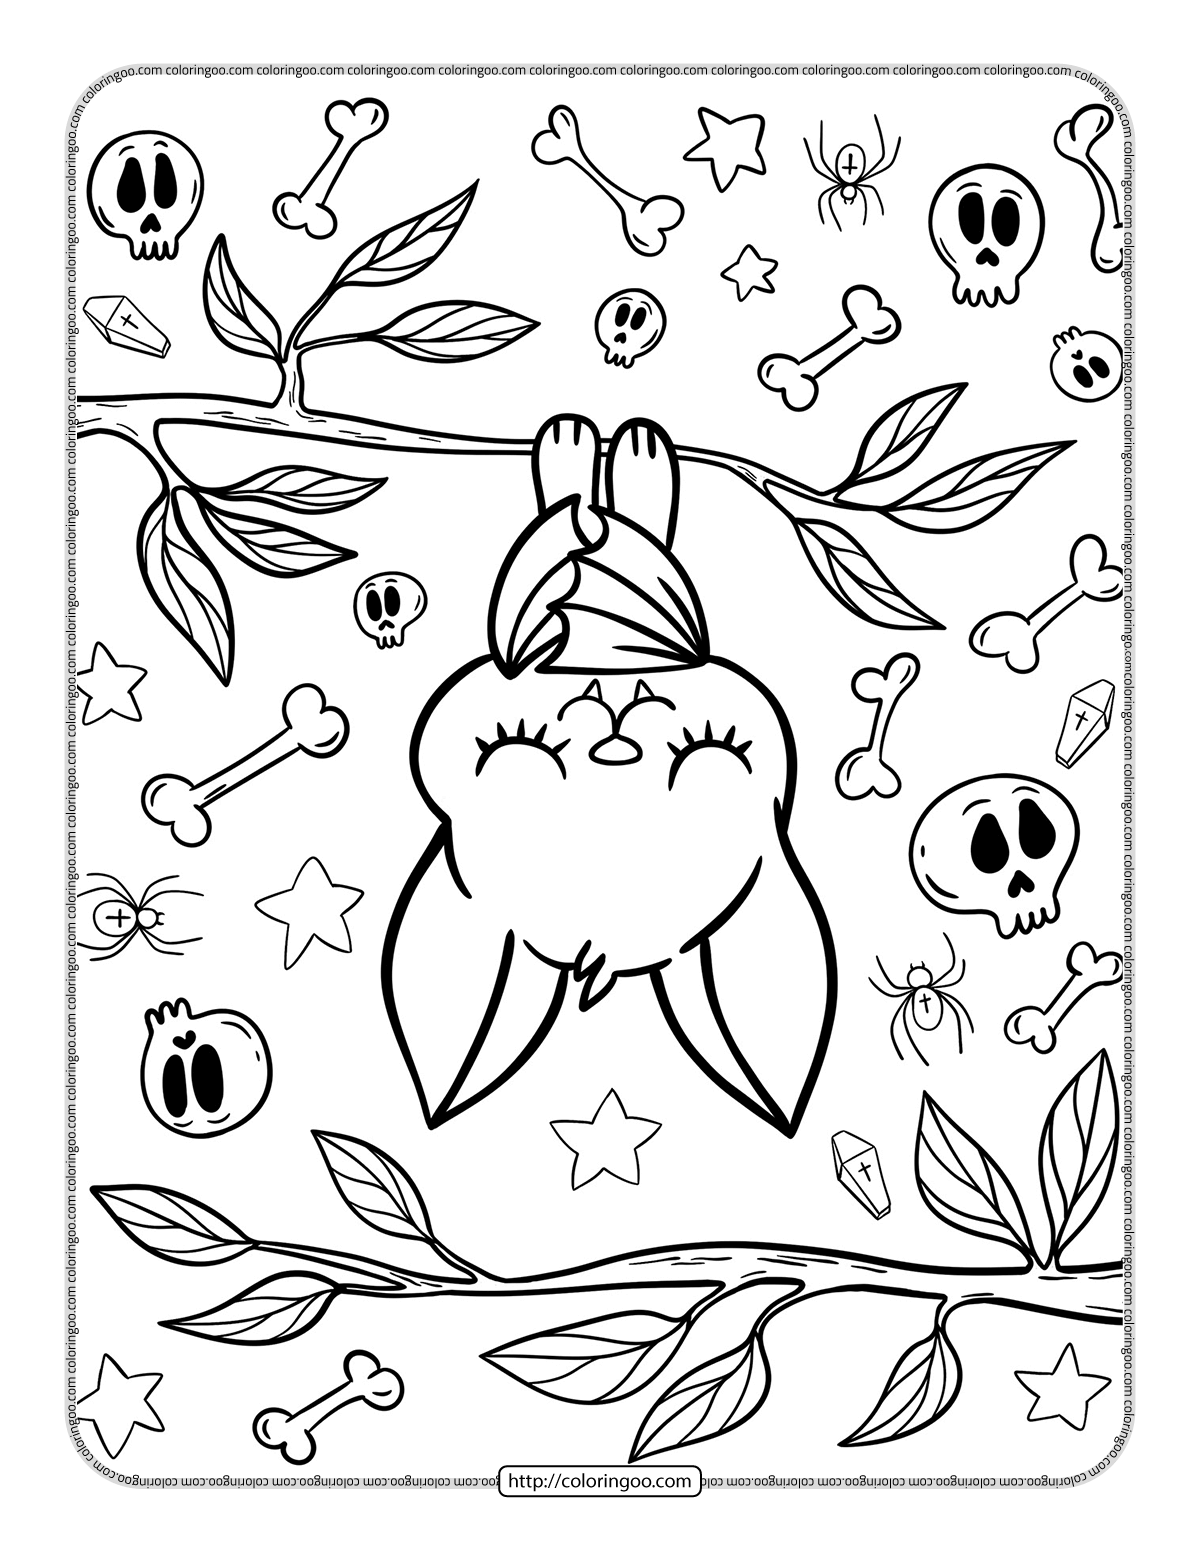 cute kawaii coloring page for children